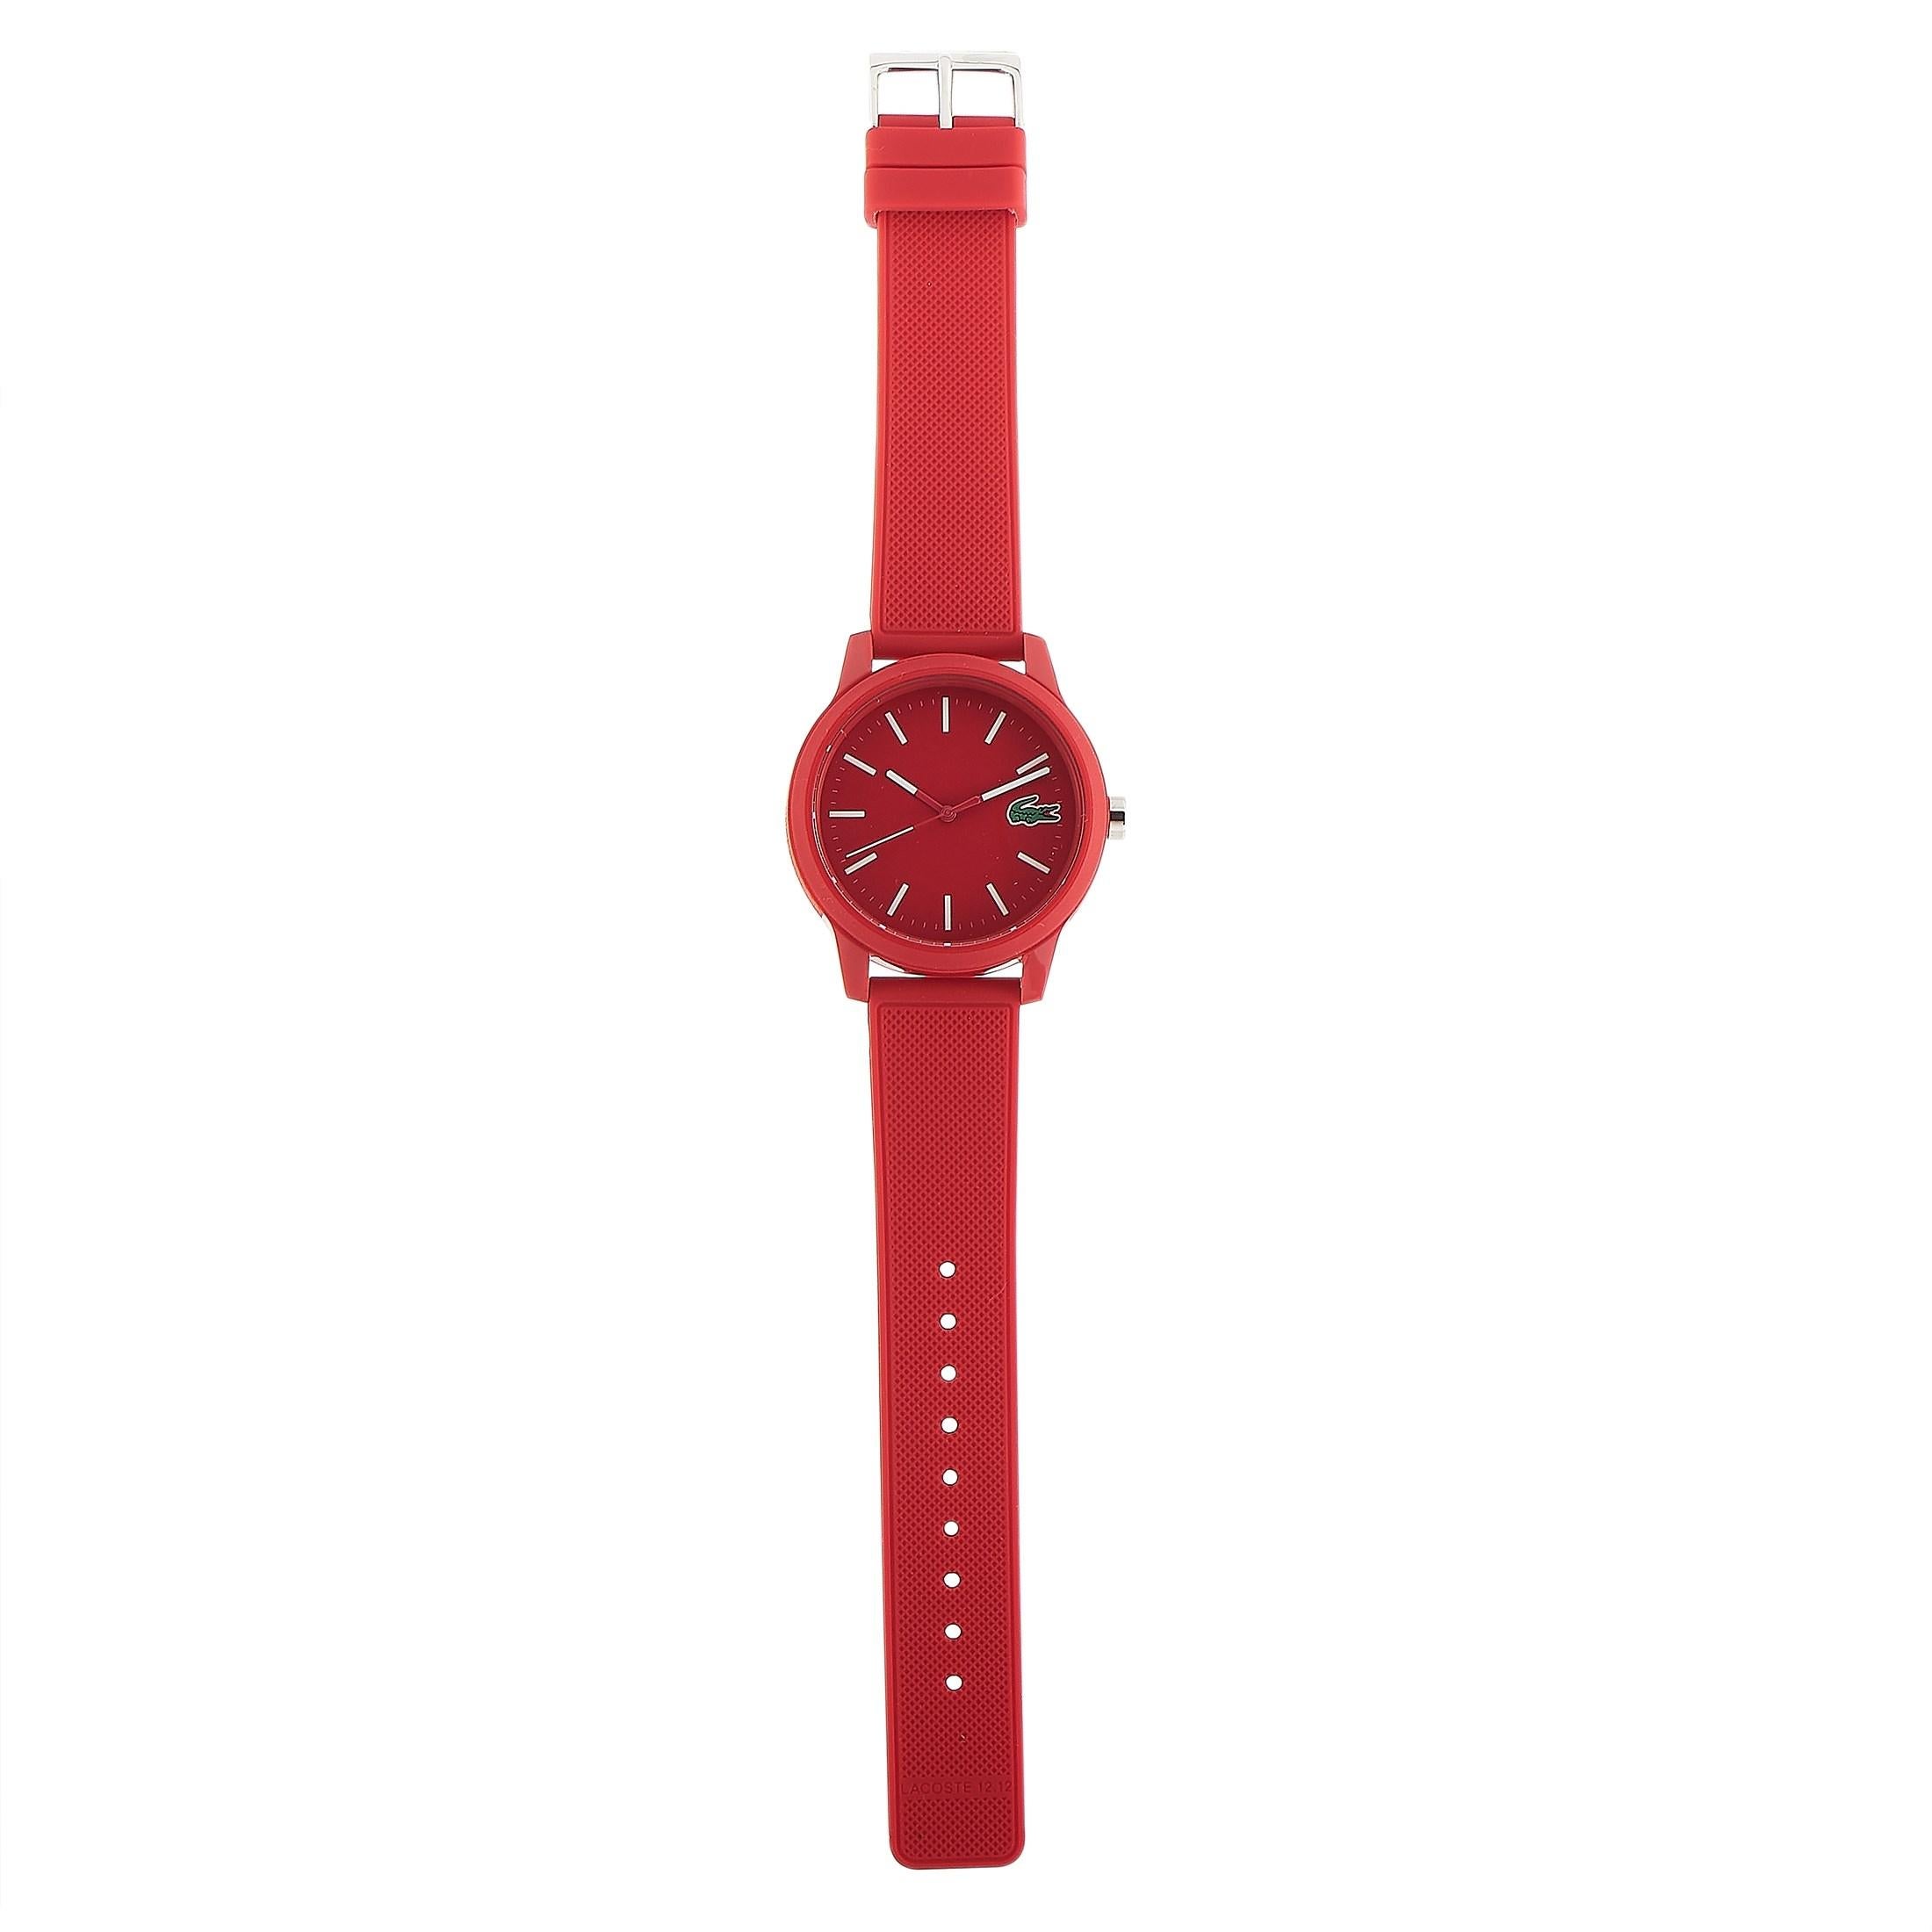 The Lacoste.12.12 watch, reference number 2010988, is presented with a red TR90 case that measures 42 mm in diameter and boasts stainless steel back. This model is powered by a quartz movement and indicates hours, minutes and seconds on the red